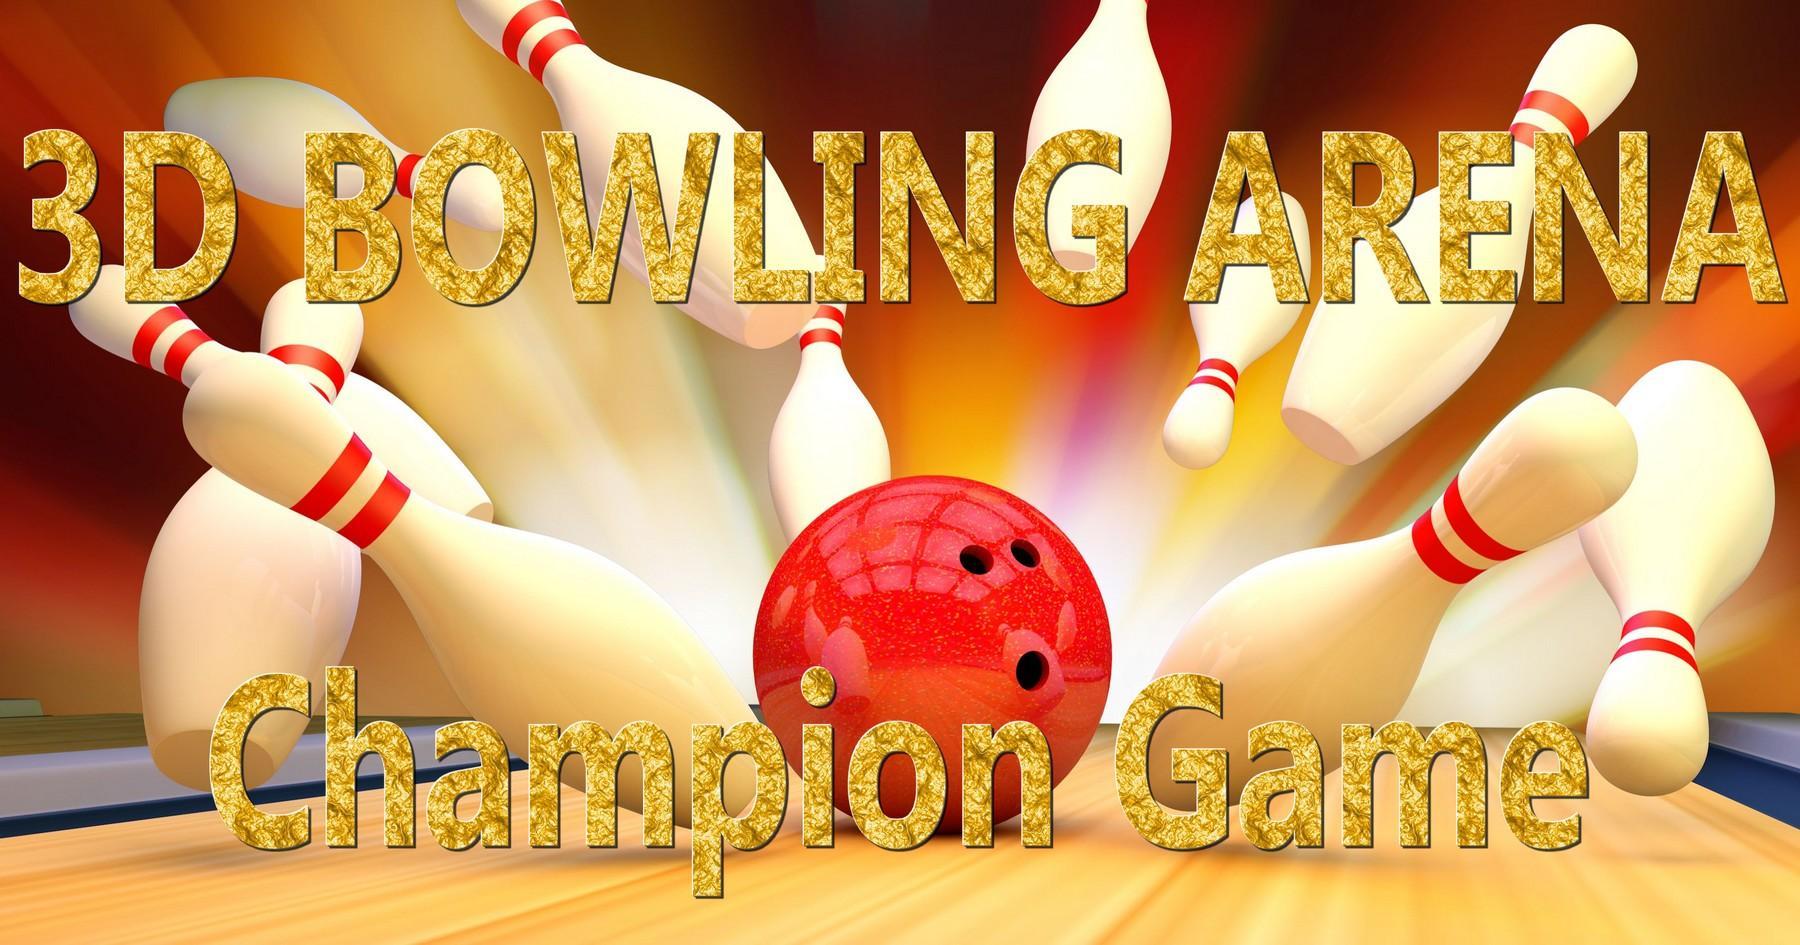 3D Bowling Arena Champion Game For Android - APK Download